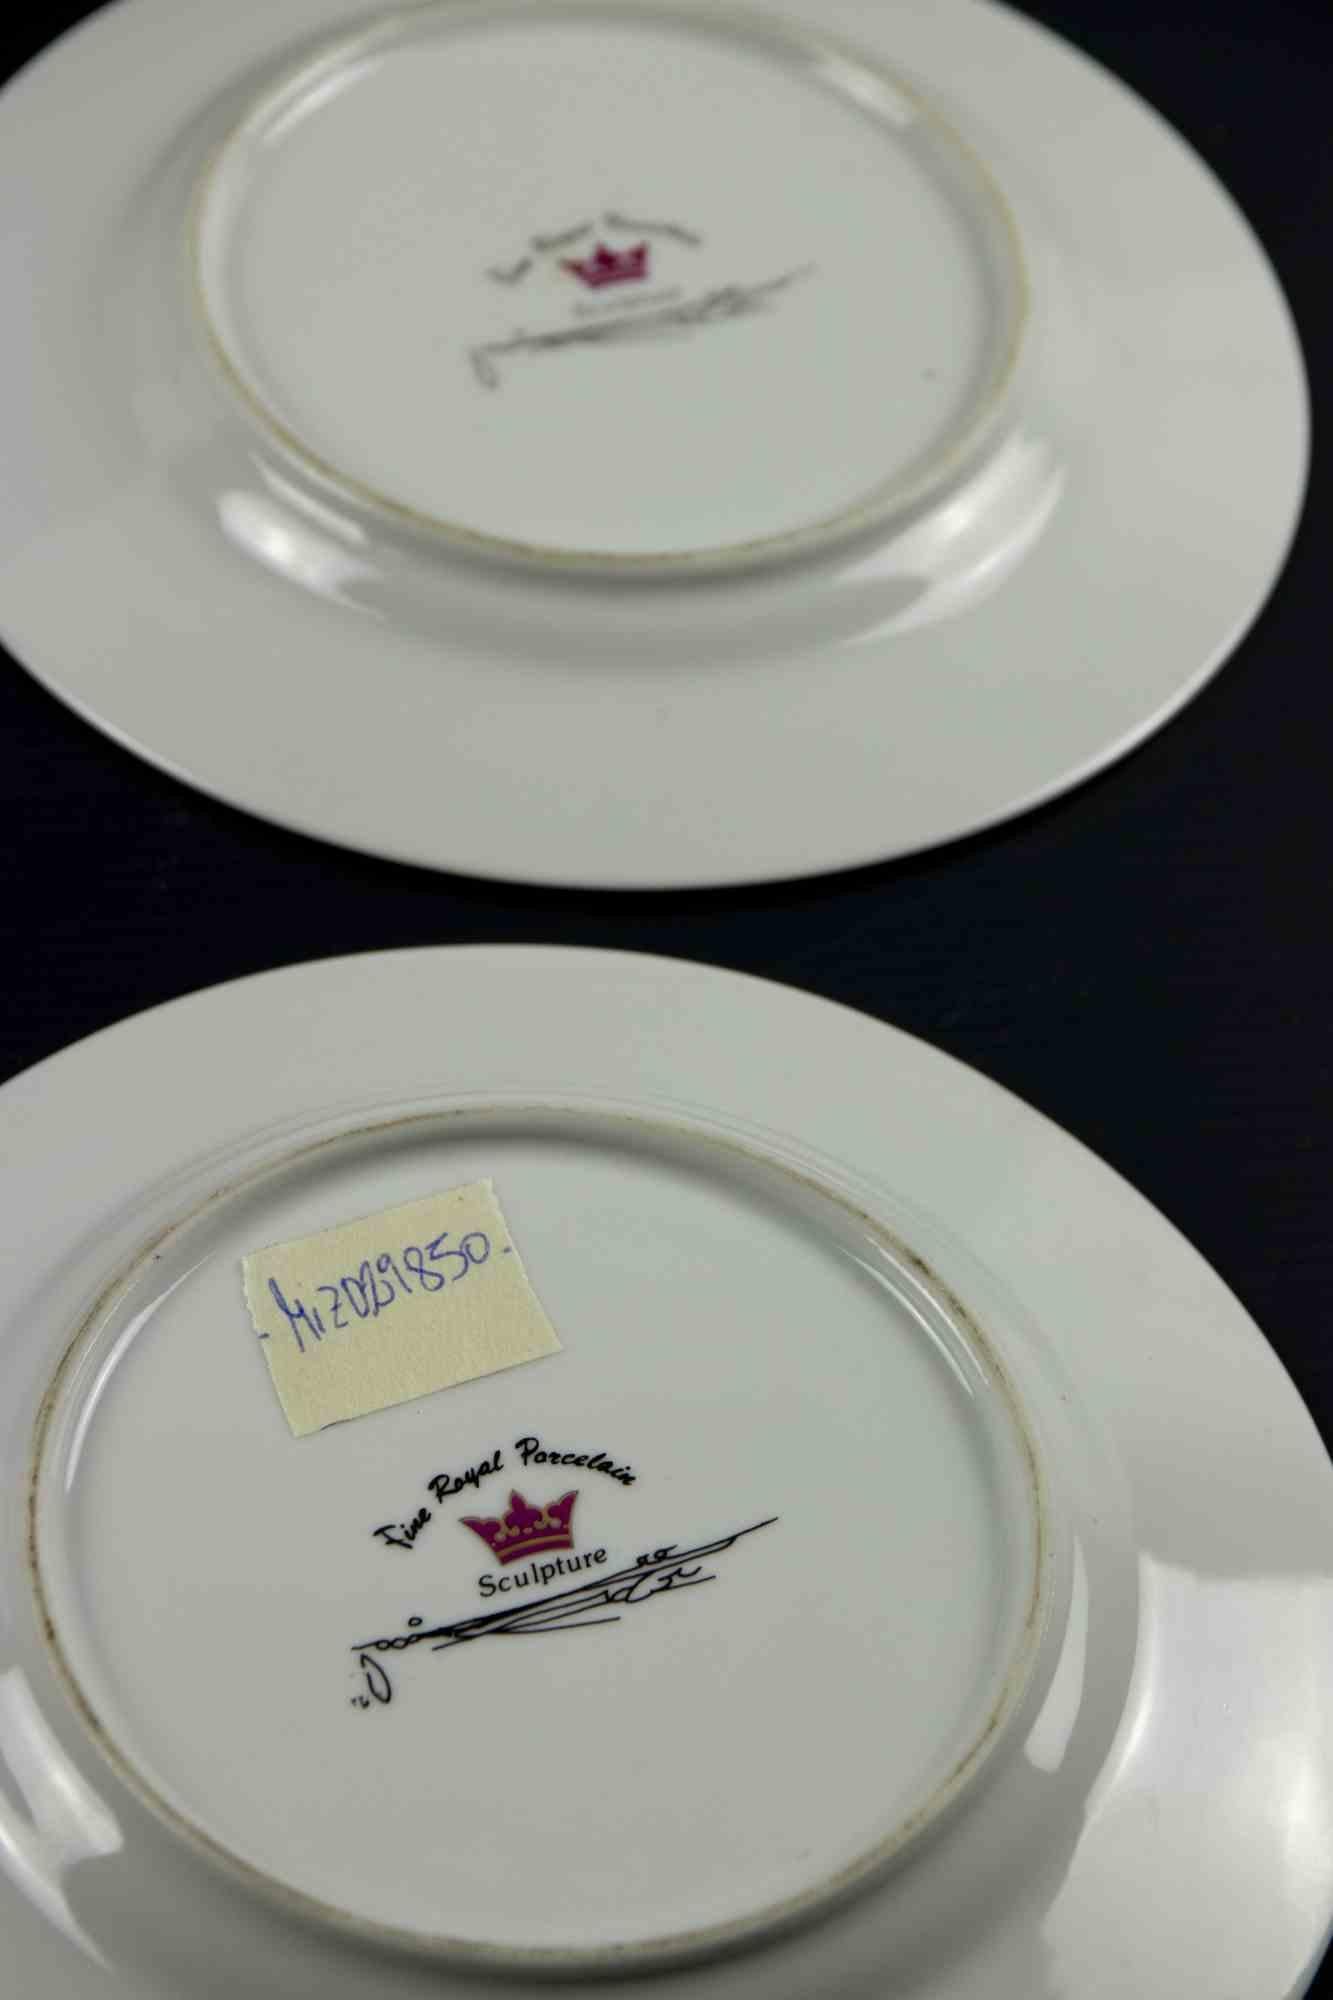 British Vintage Pair of Plates with Egyptian Motives, by Fine Royal Porcelain Sculpture